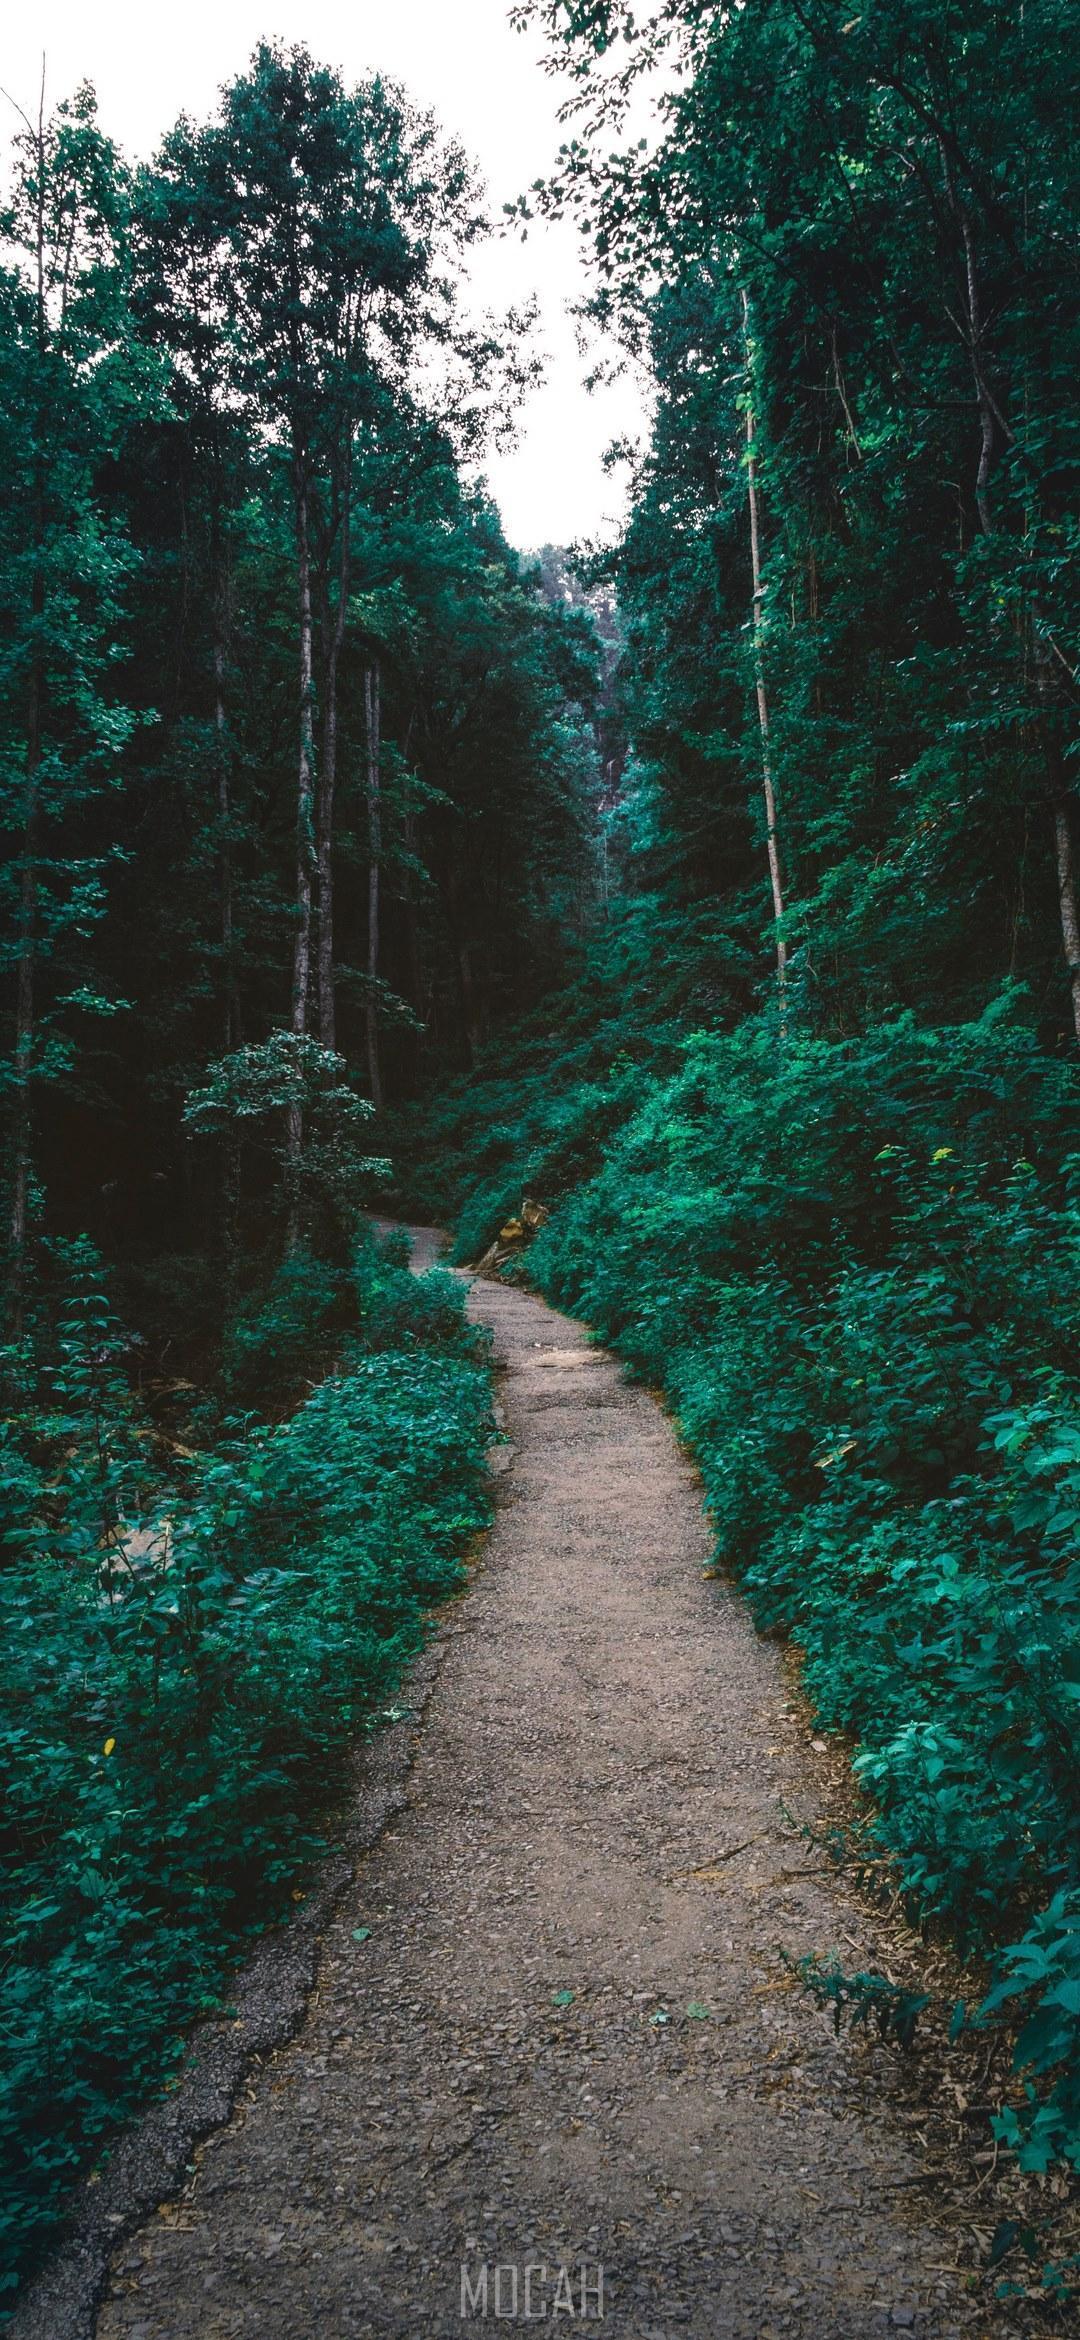 HD wallpaper, A Dirt Path Through A Verdant Forest In Amicalola Falls State Park, Oppo Reno 2 Z Wallpaper Free Download, Riding On The Rolling Tide, 1080X2340